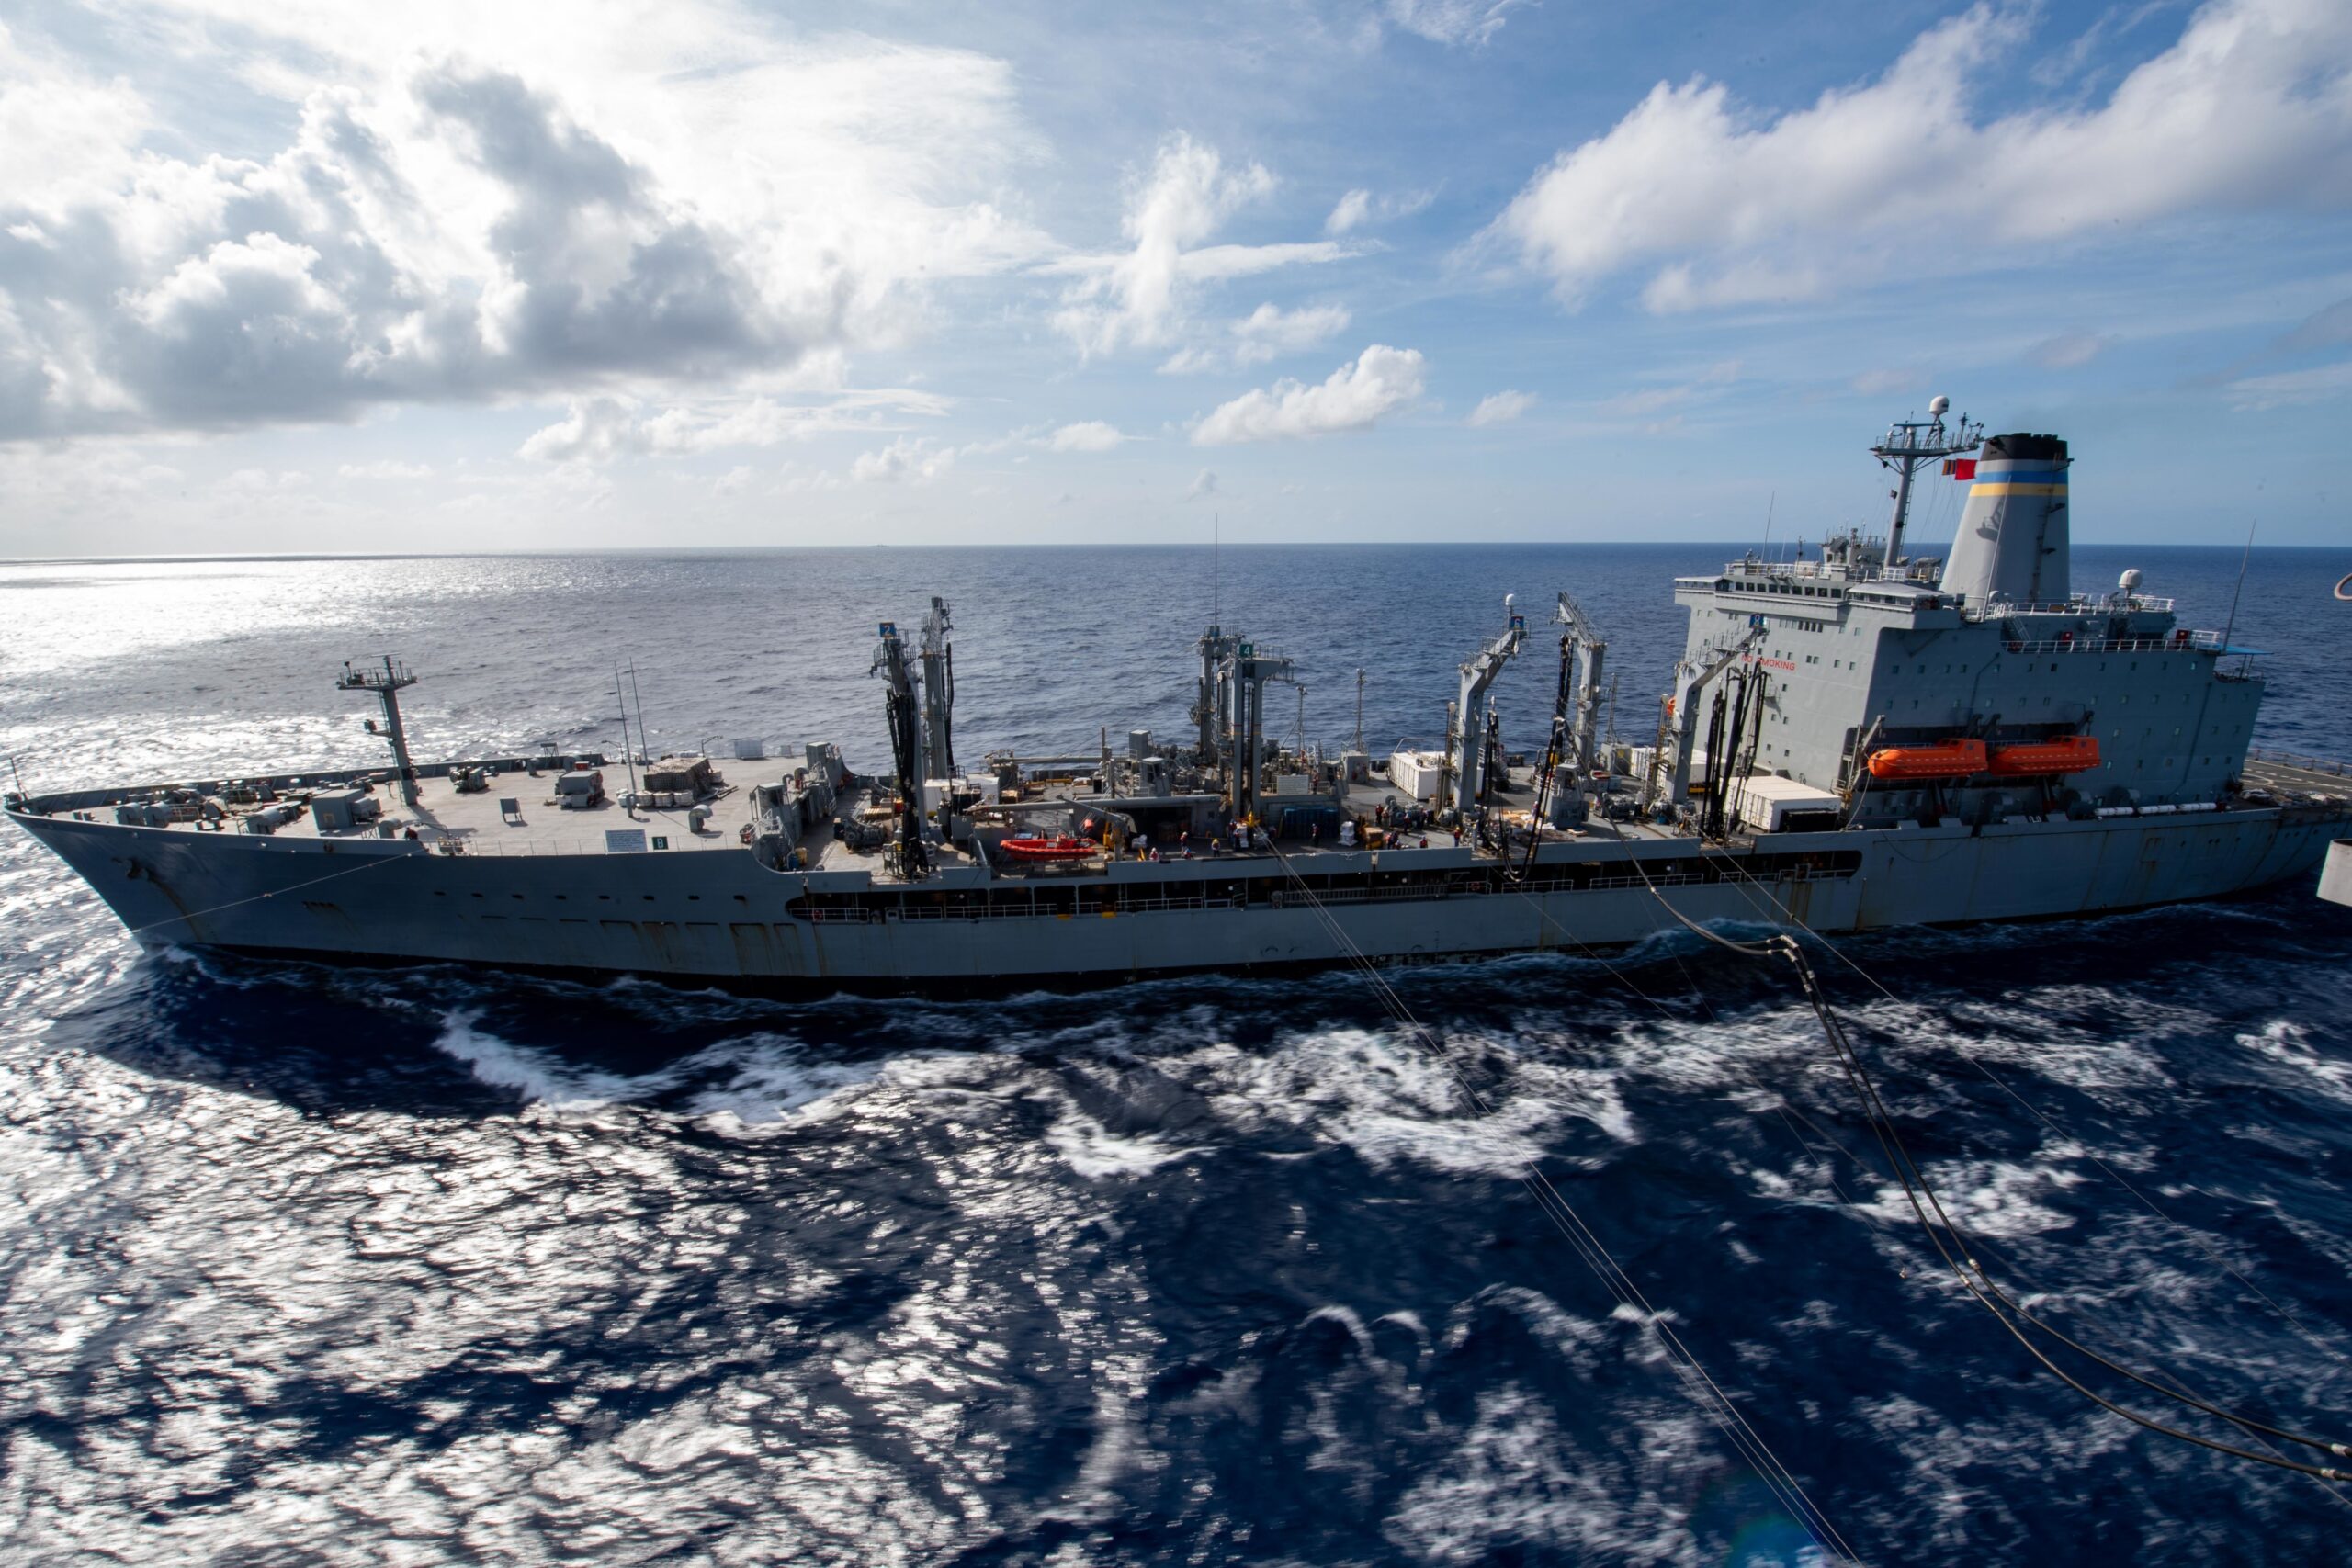 SOUTH CHINA SEA (April 24, 2020) Amphibious assault ship USS America (LHA 6) sails alongside fleet replenishment oiler USNS Pecos (T-AO 197) during a replenishment-at-sea. America, flagship of the America Expeditionary Strike Group, 31st Marine Expeditionary Unit team is operating in the U.S. 7th Fleet area of operations to enhance interoperability with allies and partners and serve as a ready response force to defend peace and stability in the Indo-Pacific region. (U.S. Navy photo by Mass Communication Specialist 3rd Class Jomark A. Almazan)